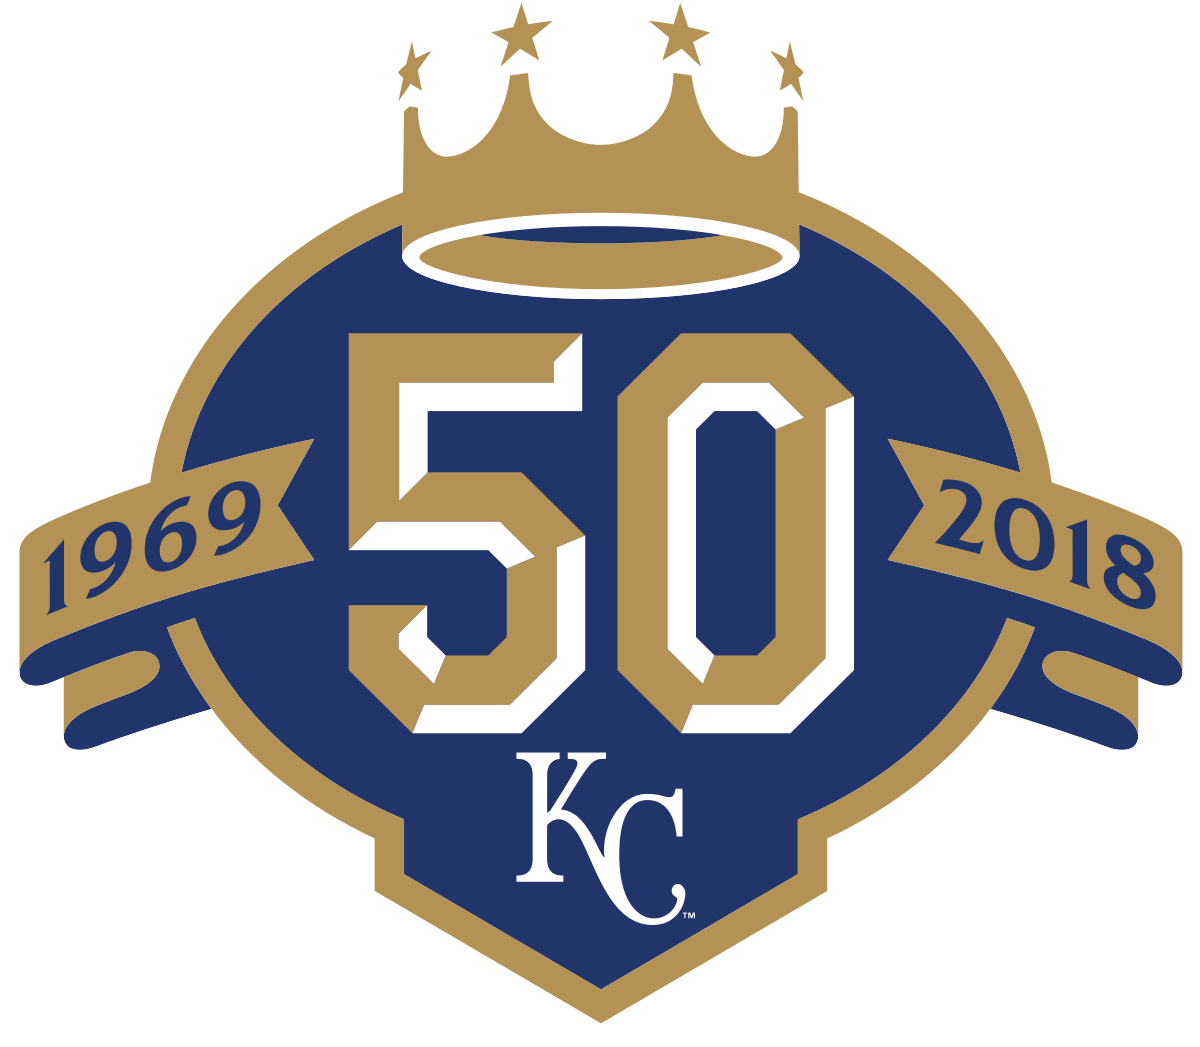 8 Fun Facts About the KC Royals